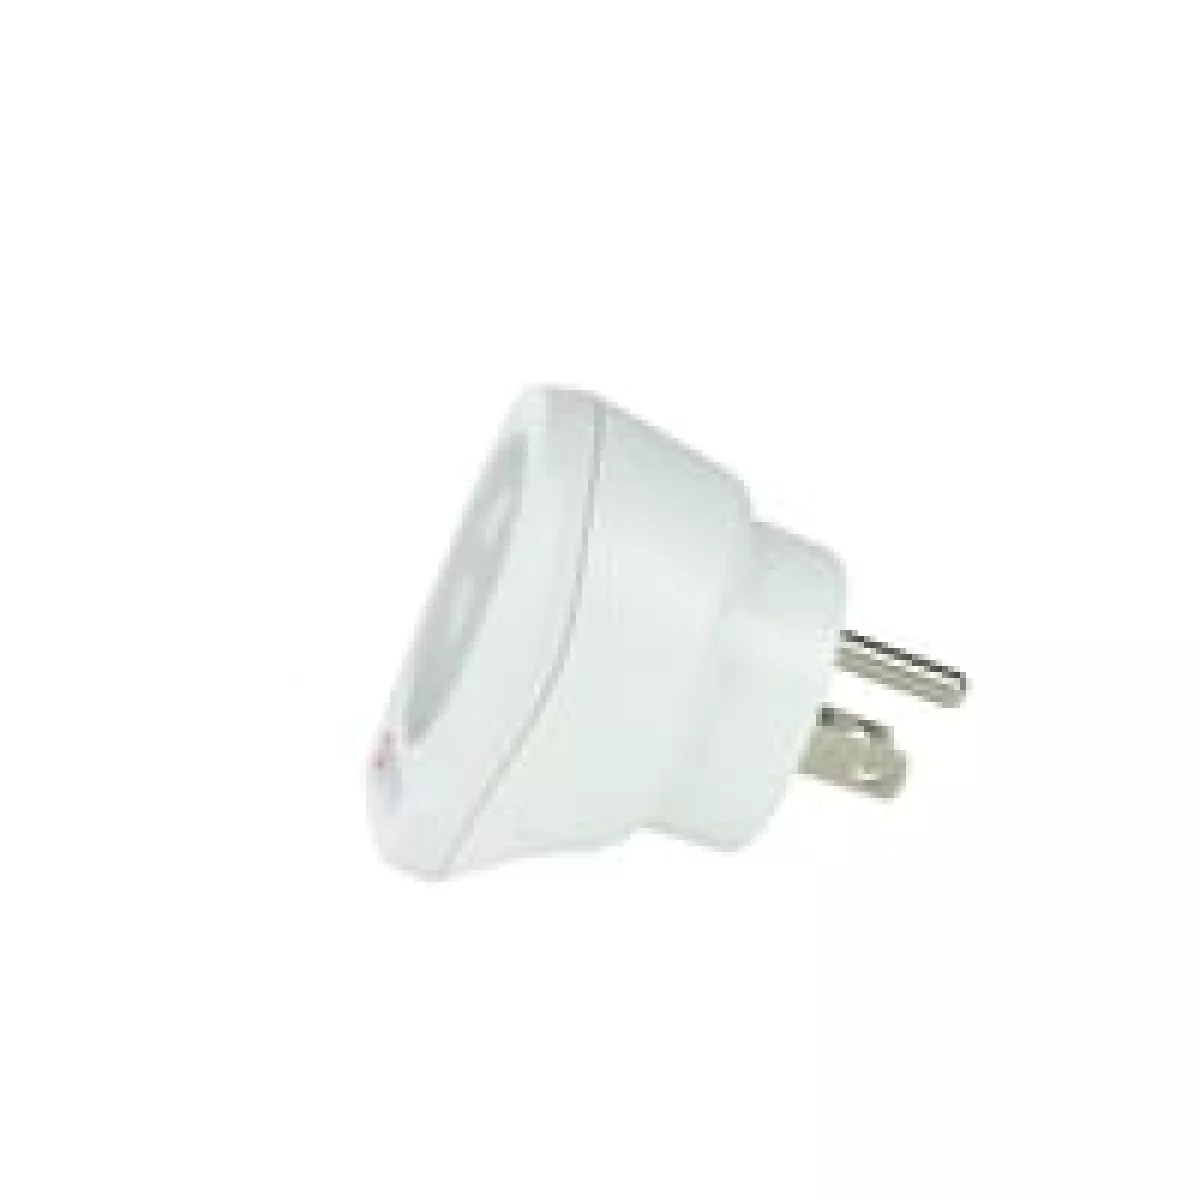 #2 - SKROSS Europe to USA travel adapter, 15A, 110-125V, hvid